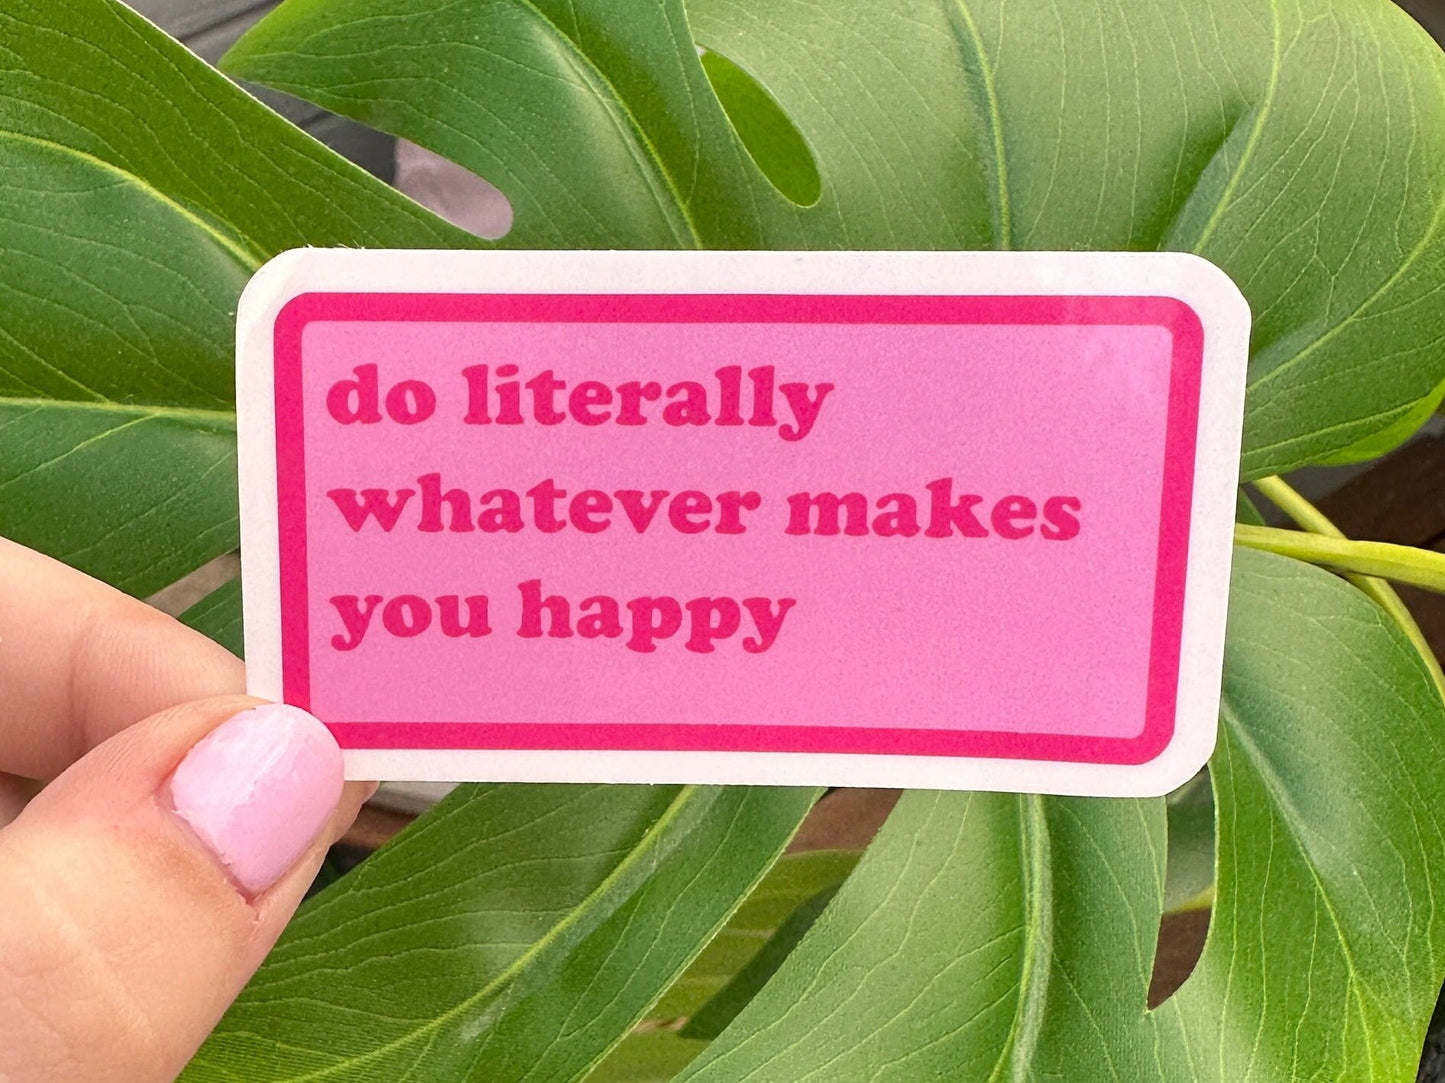 Do Literally Whatever Makes You Happy Sticker, Self Care, Positivity Love, Mental Health, Motivational Quote, Daily Affirmation, Pink Text